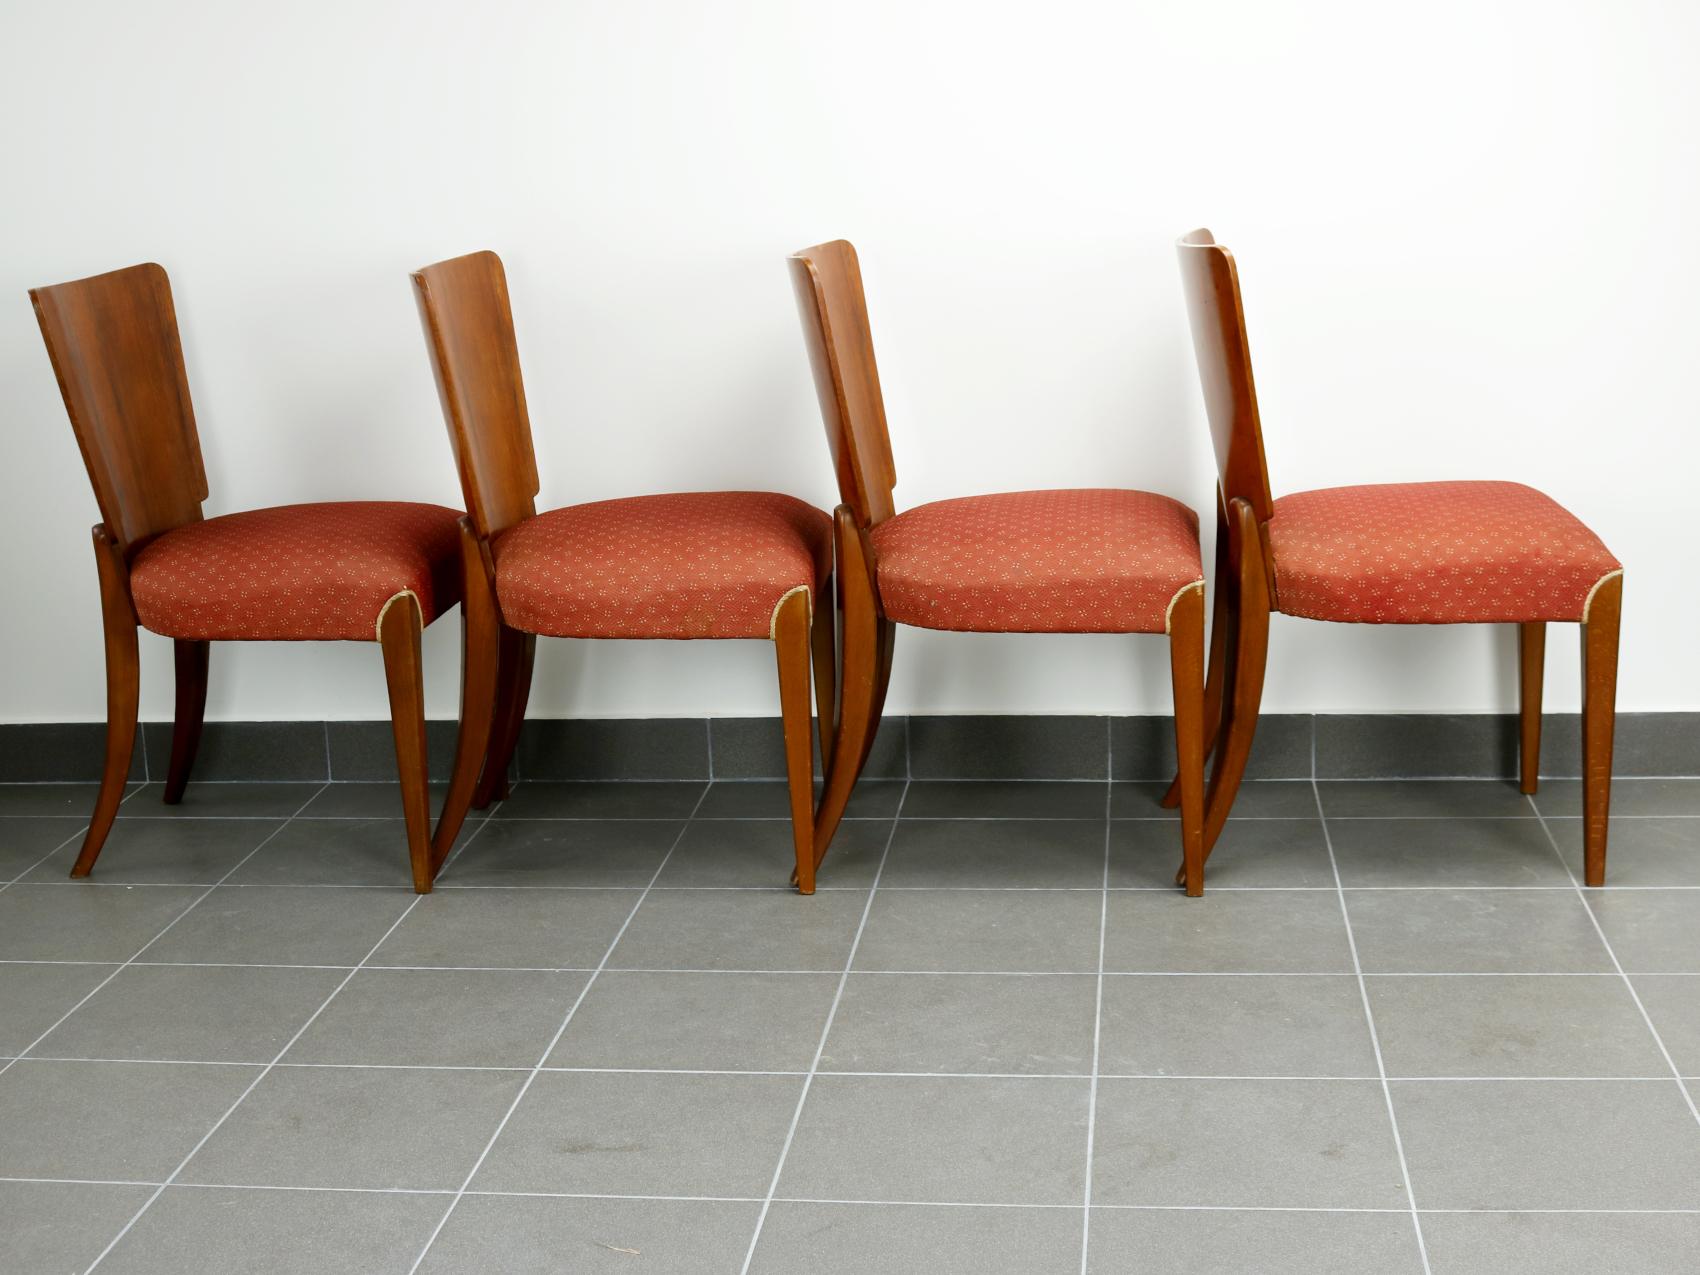 Mid-20th Century Art Deco Dining Chairs H-214 by Jindrich Halabala, 1930s For Sale